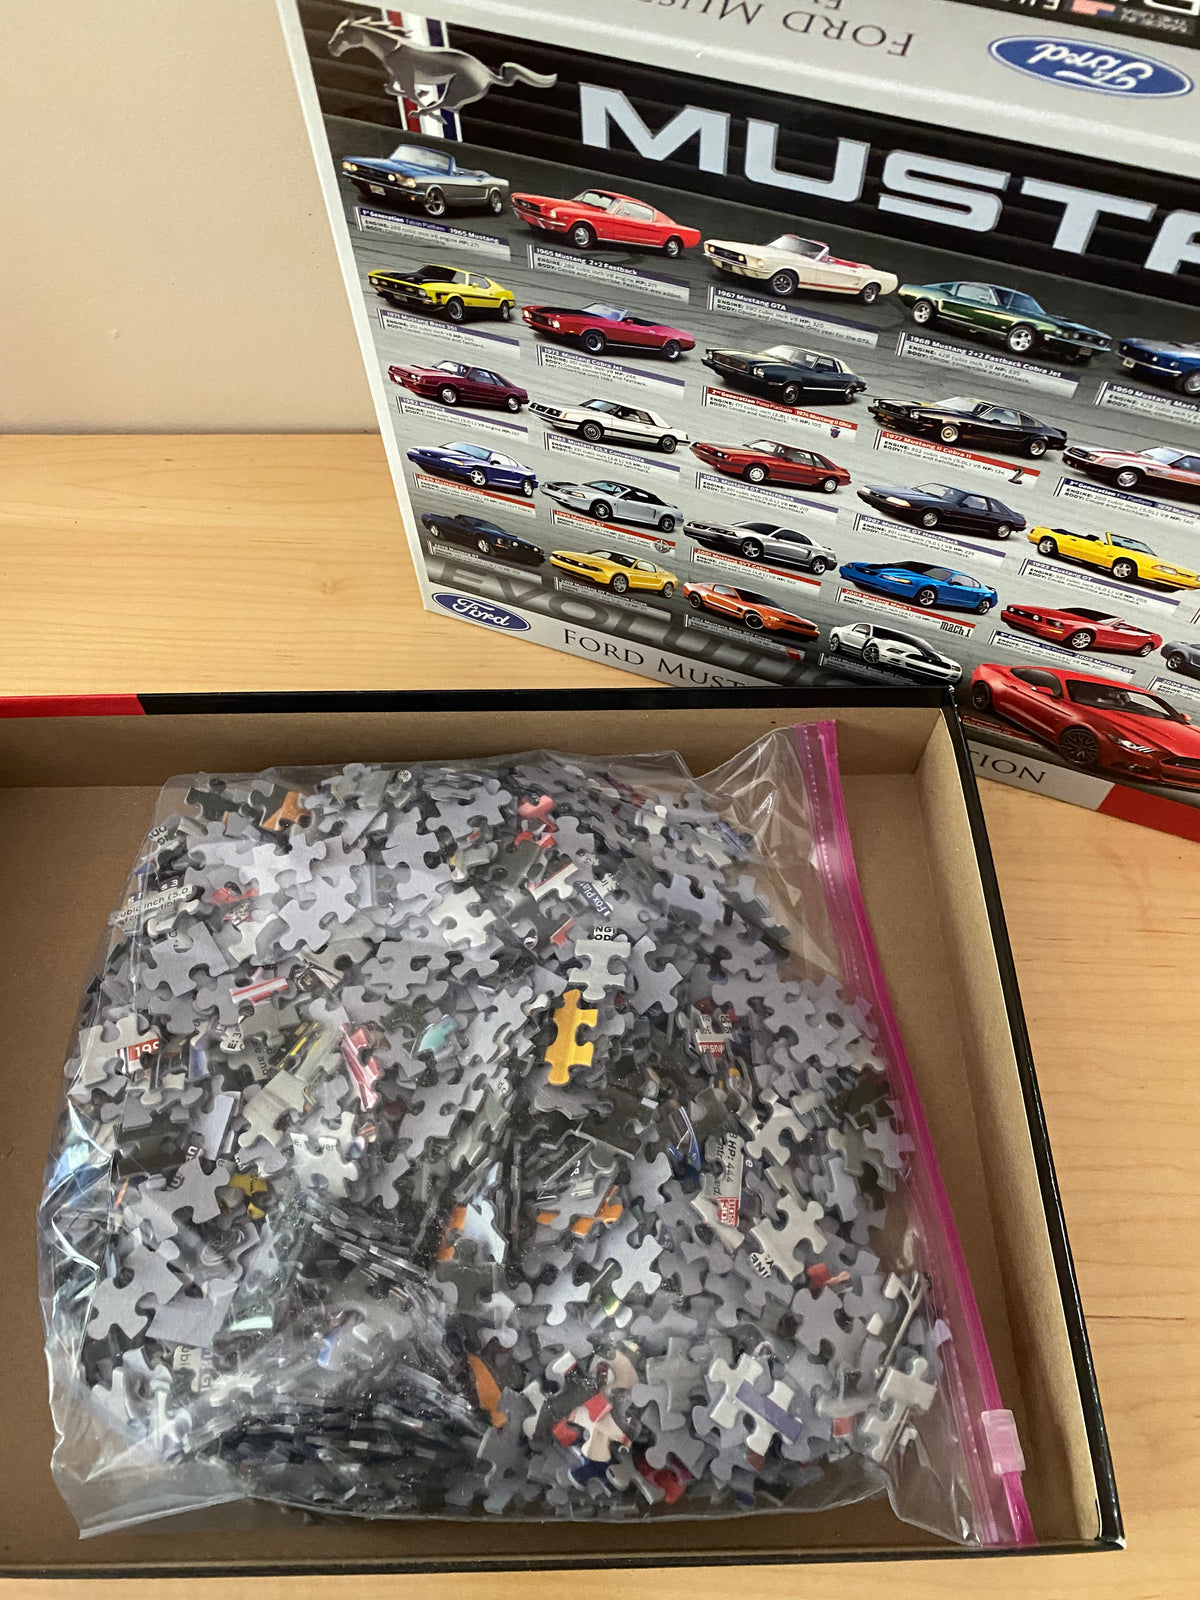 EUROGRAPHICS MUSTANG PUZZLE